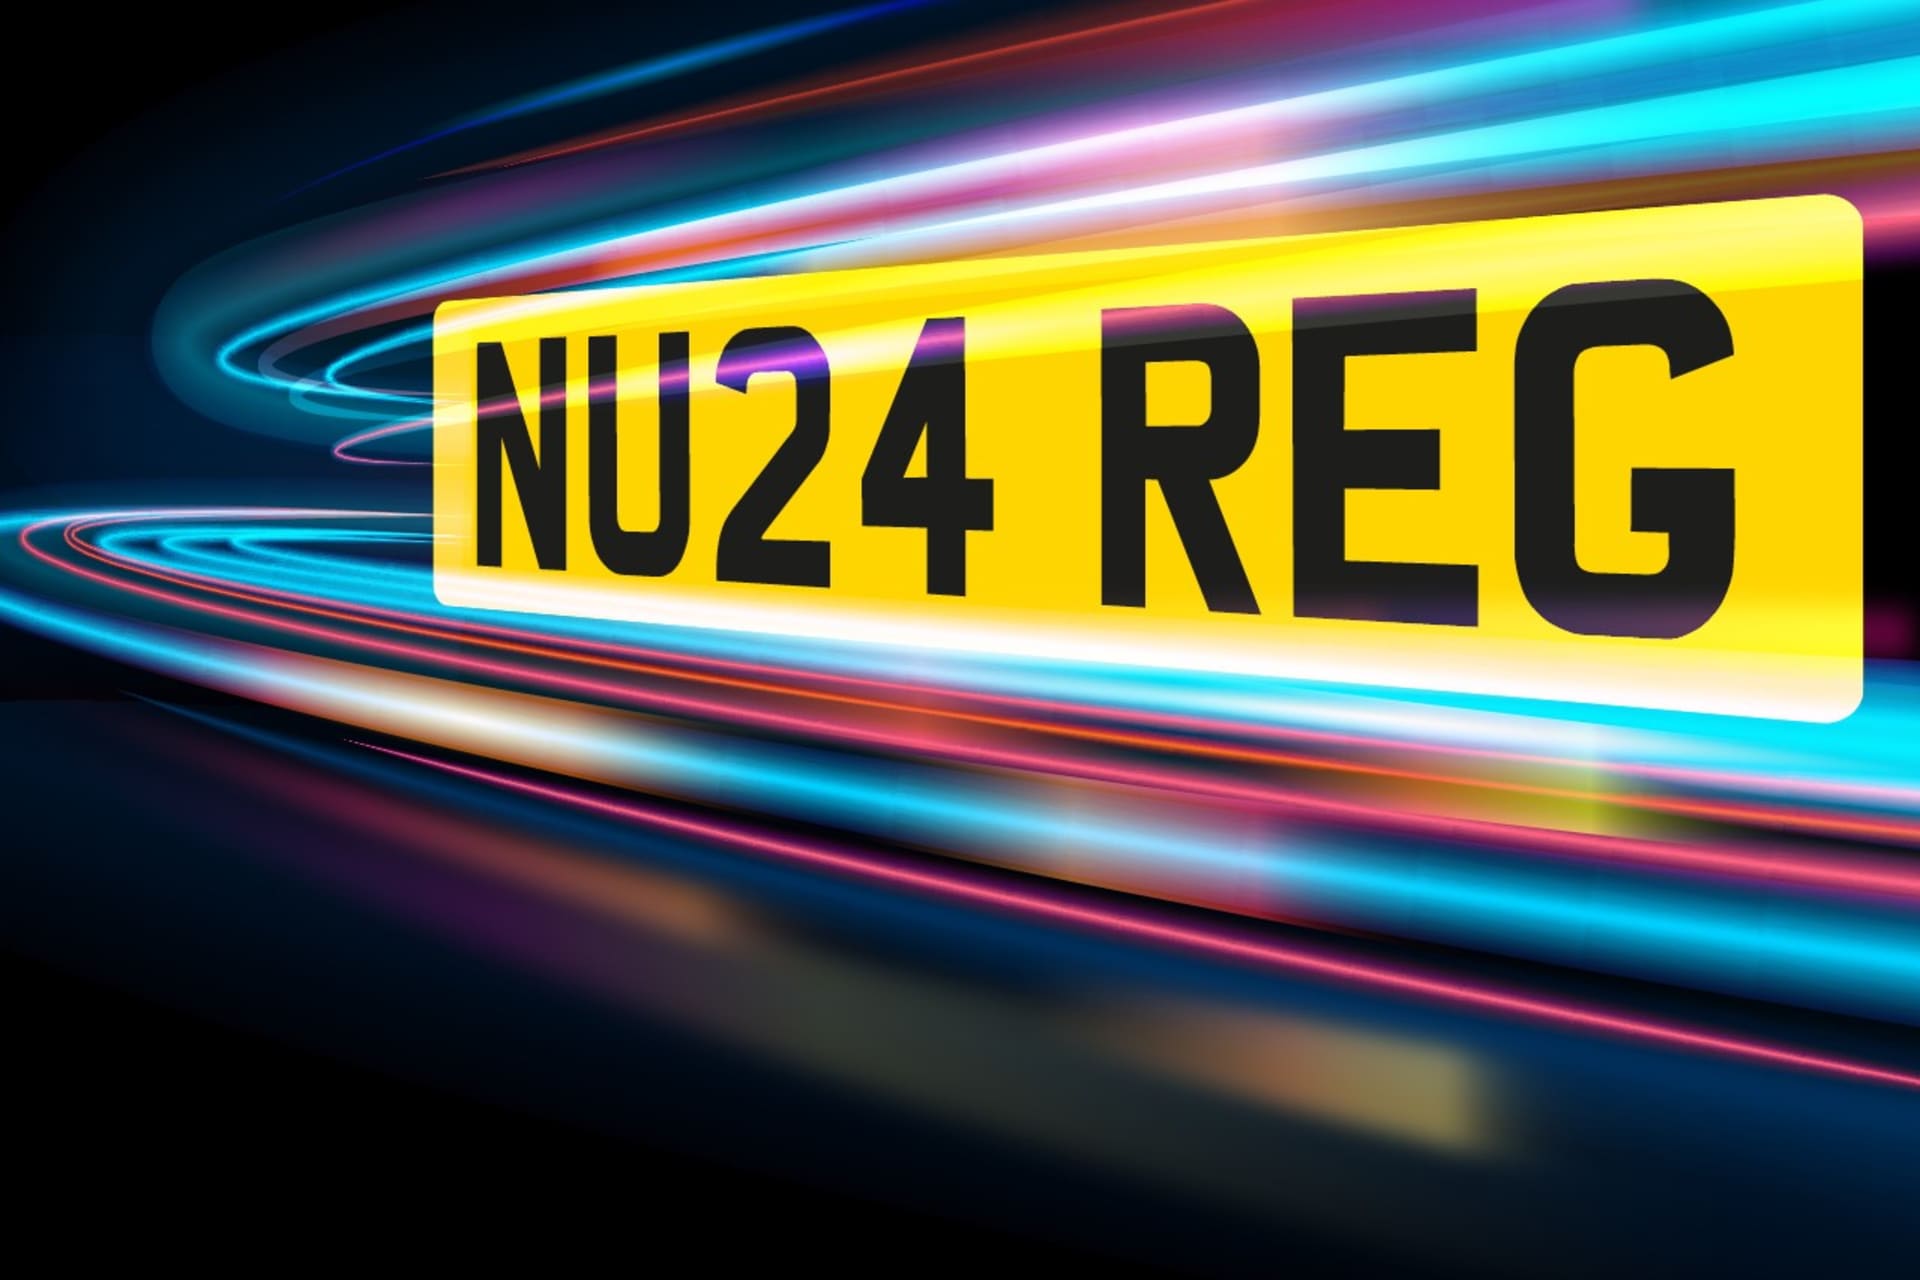 Order your new 24 plate today!